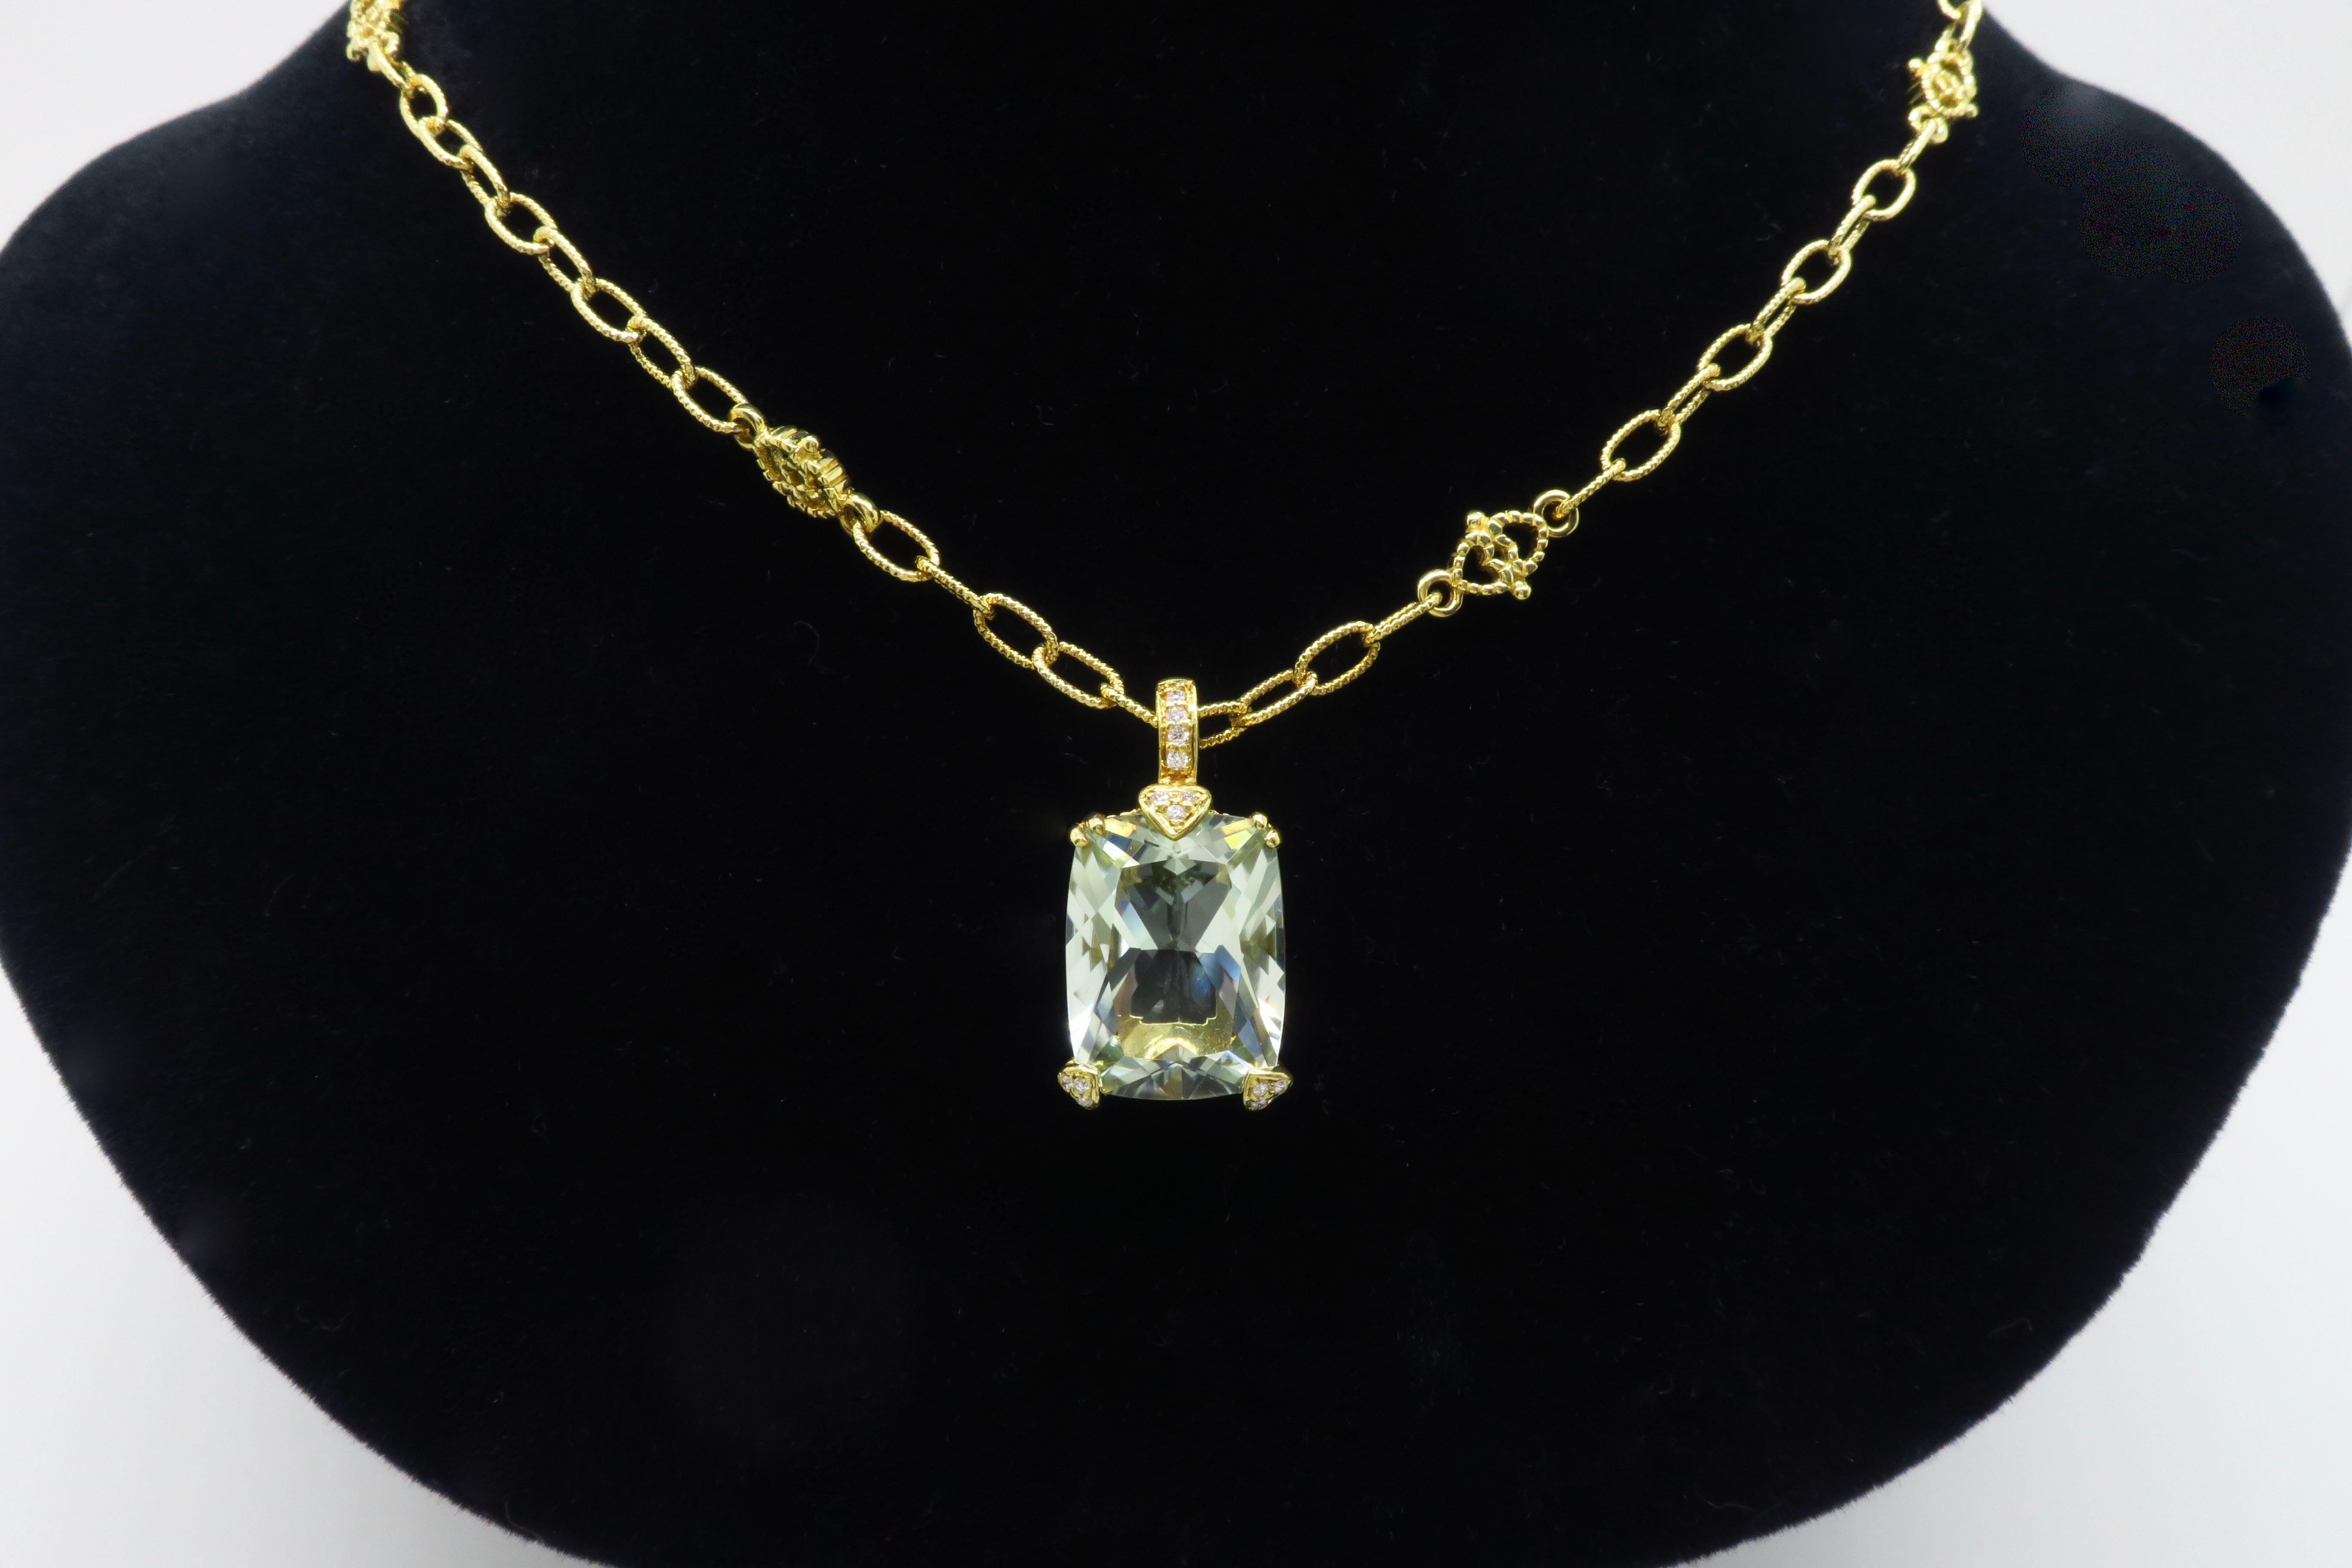 Green Amethyst and Diamond Pendant Necklace in 18 Karat Yellow Gold 1